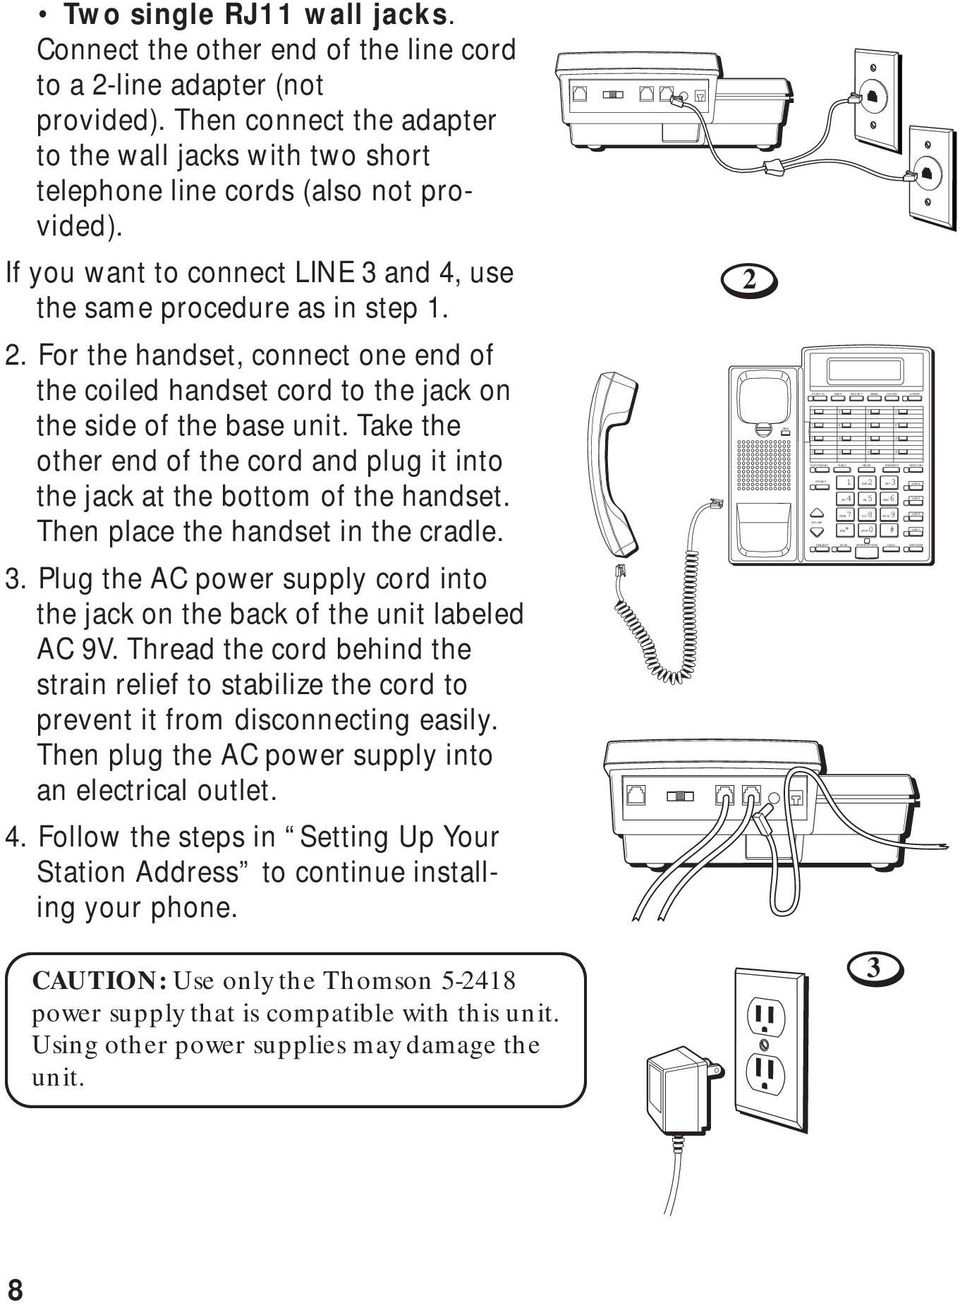 Then connect the adapter to the wall jacks with two short telephone line cords (also not provided). If you want to connect LINE 3 and 4, use the same procedure as in step 1. 2.